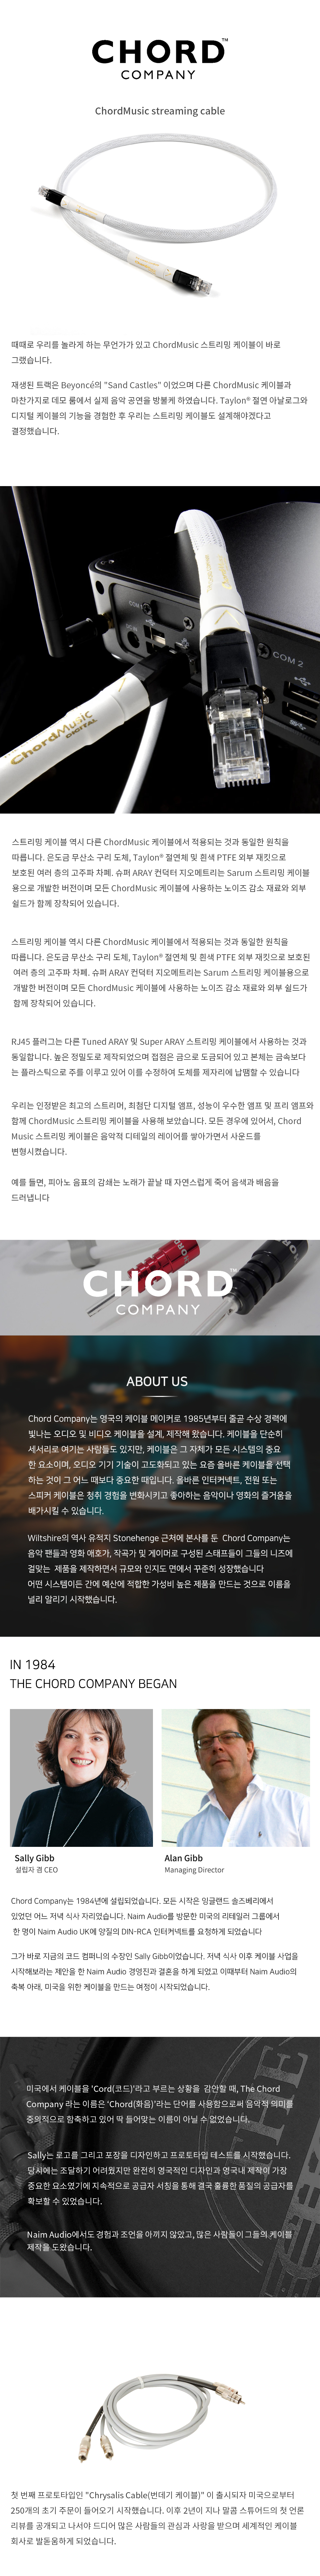 Chordmusic%20Streaming%20Cable.jpg